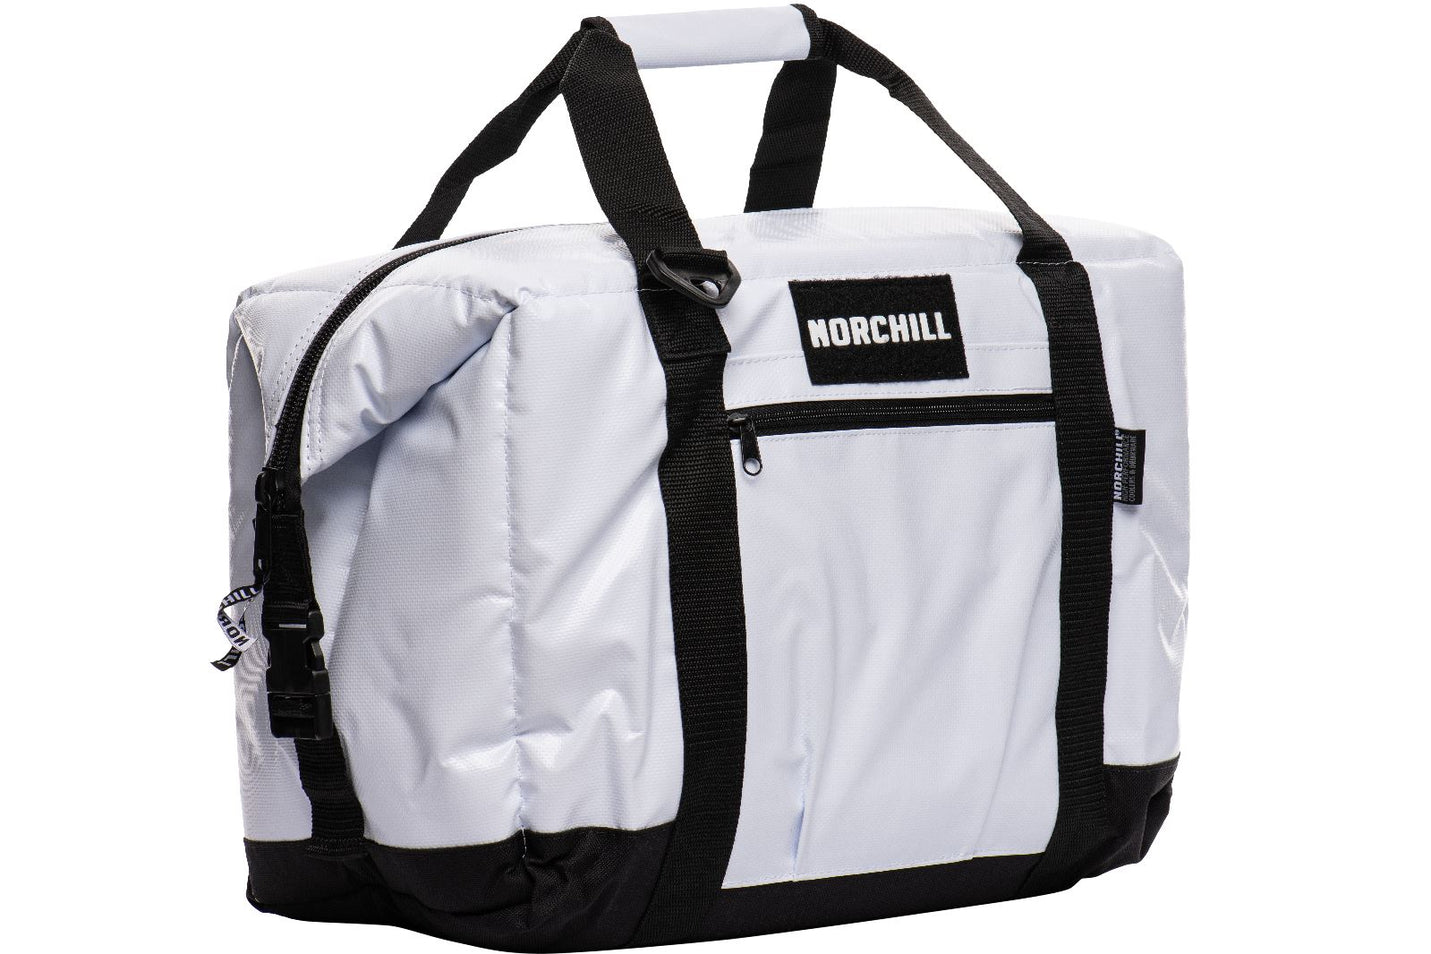 Fish Bag, Insulated Fishing Cooler, Leakproof Kill Bags, 41x16.5, White,  Waterproof Collapsible Ice Chest, for Catfish, Salmon, Trout, Bass, Kayak